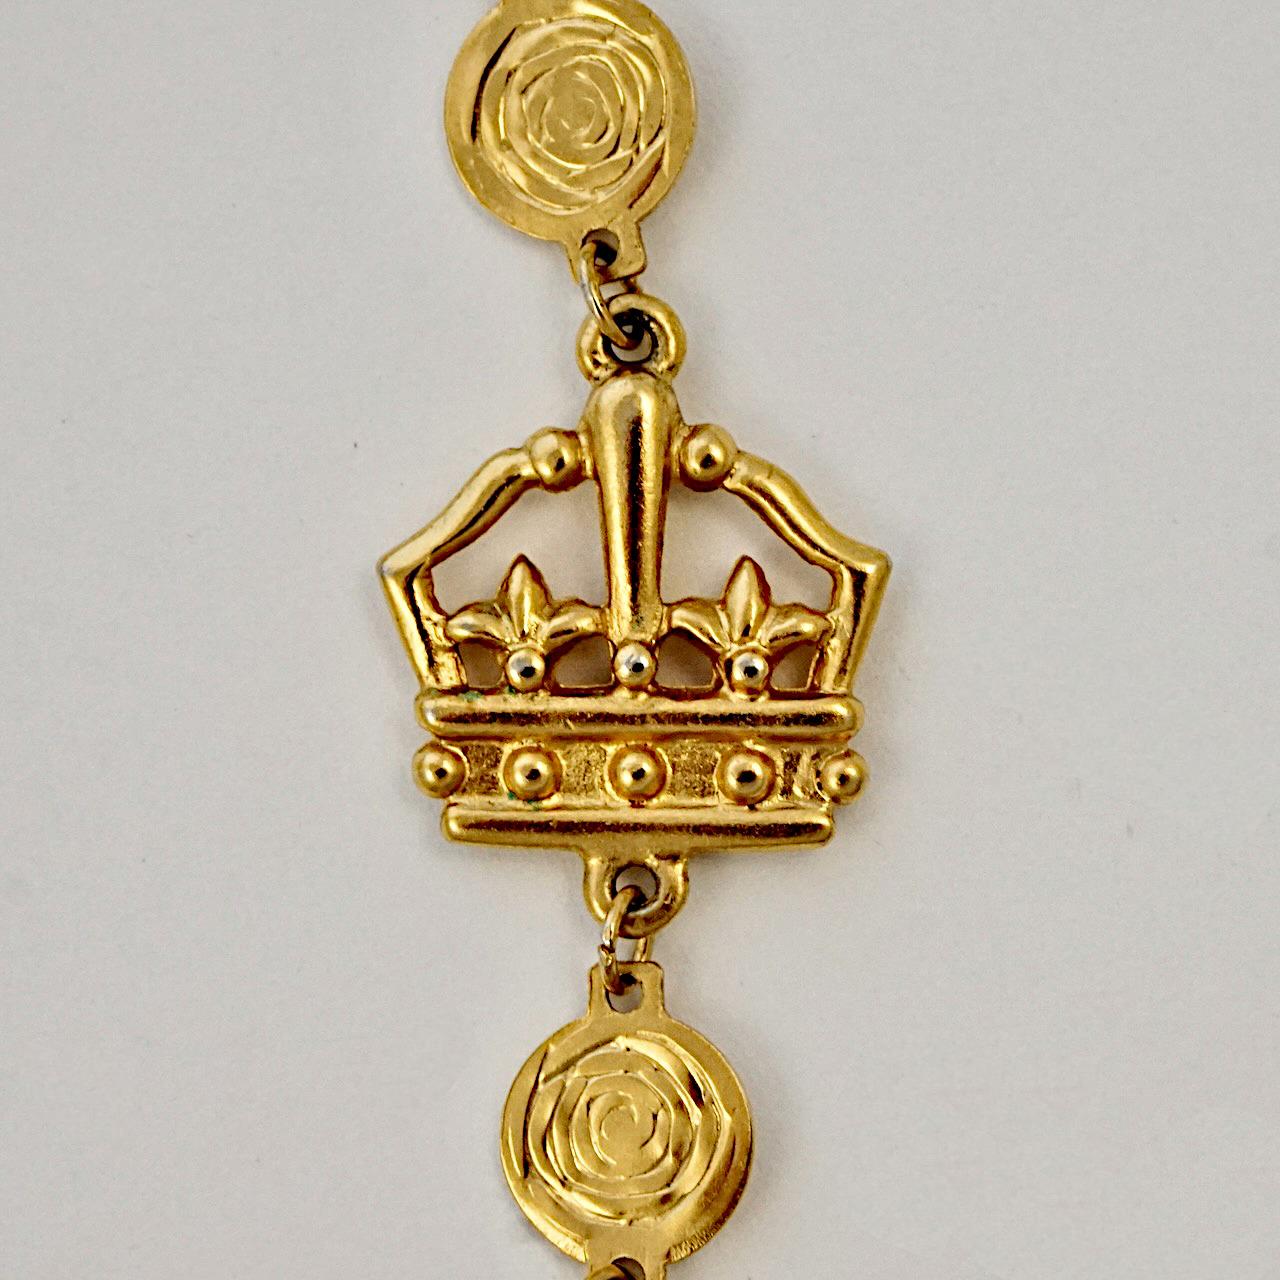 Liz Claiborne gold plated necklace with disc links and featuring crowns and lions. Measuring length 97.7cm / 38.4 inches. The necklace is in very good condition.

This is a beautiful Liz Claiborne necklace in a lovely crown and lion design. Circa